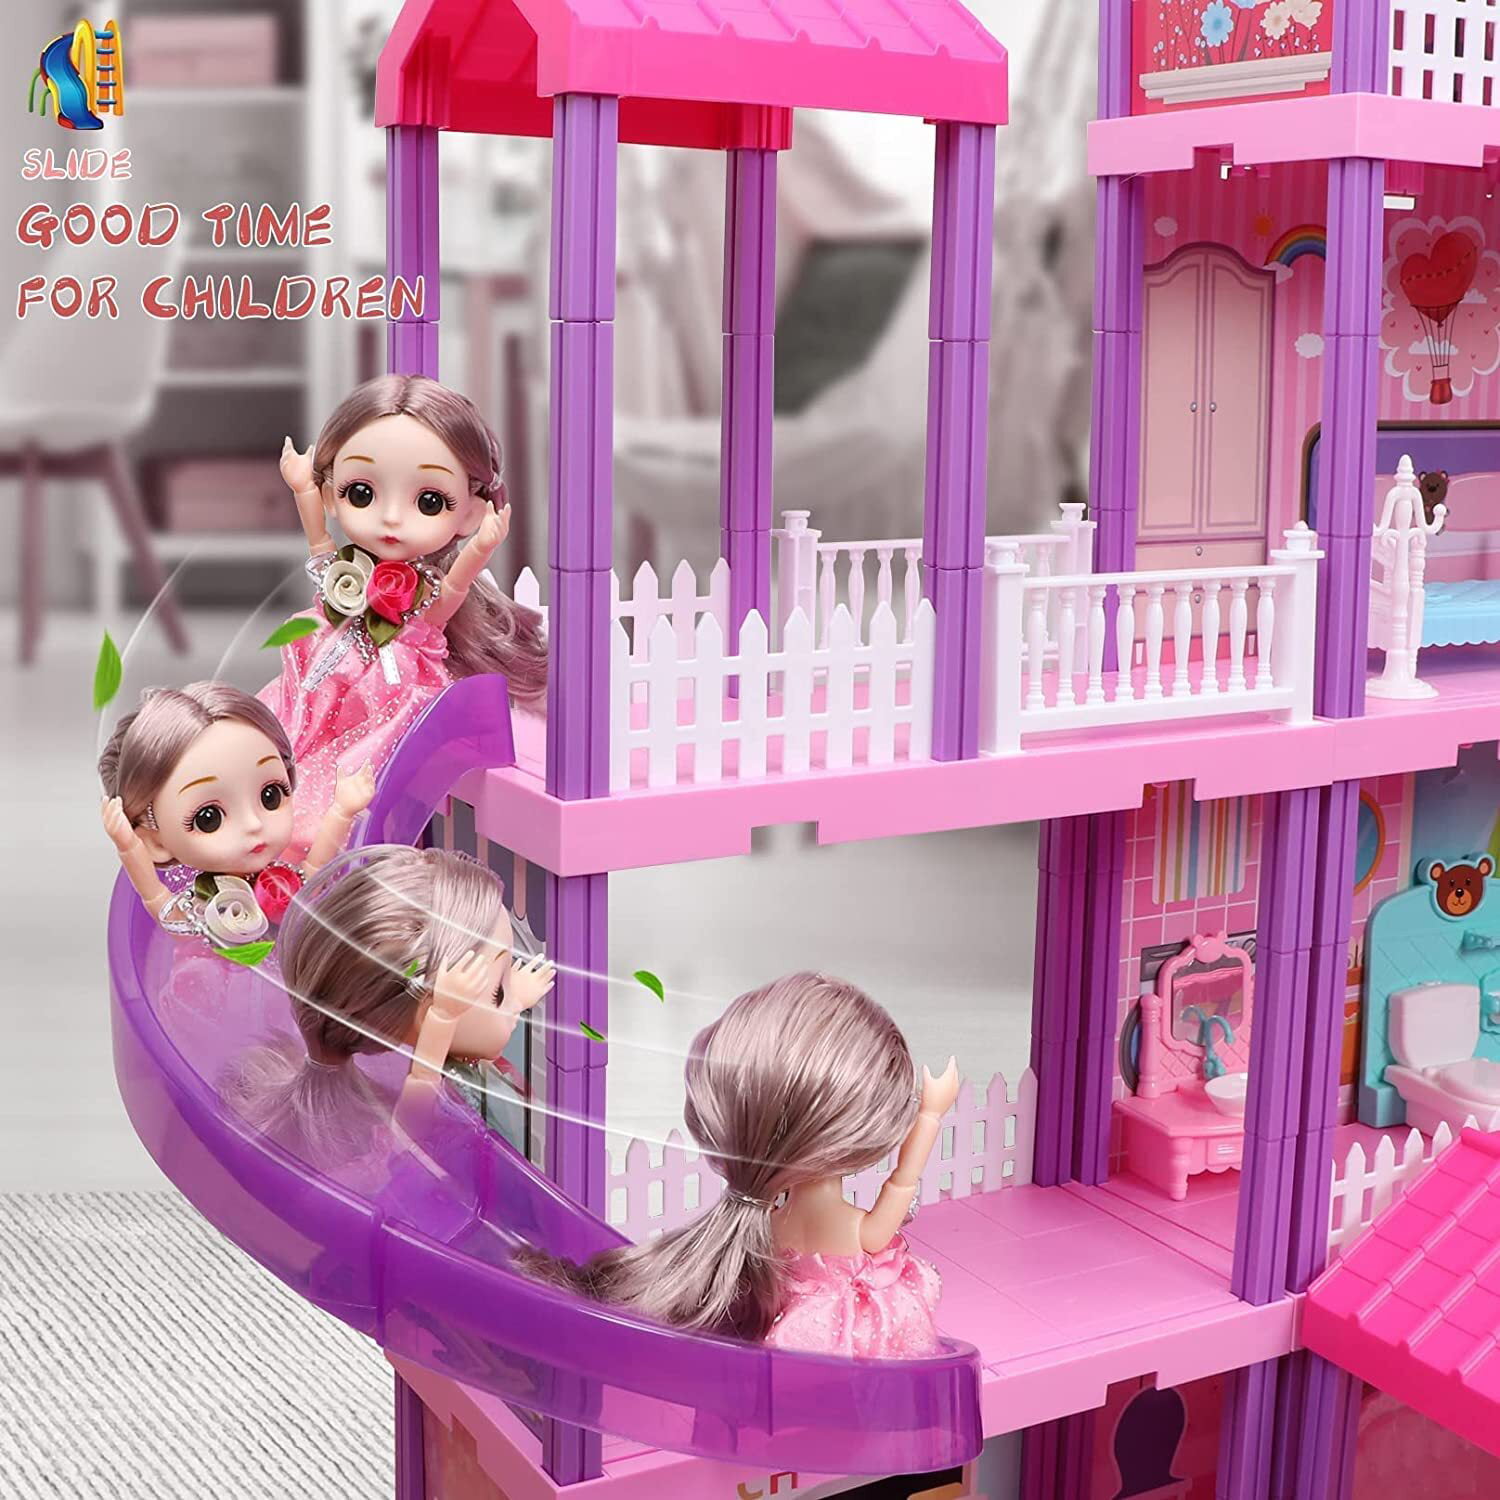 Beefunni 36 inch Dollhouse Playset Girl Toys, 11 Rooms with Doll